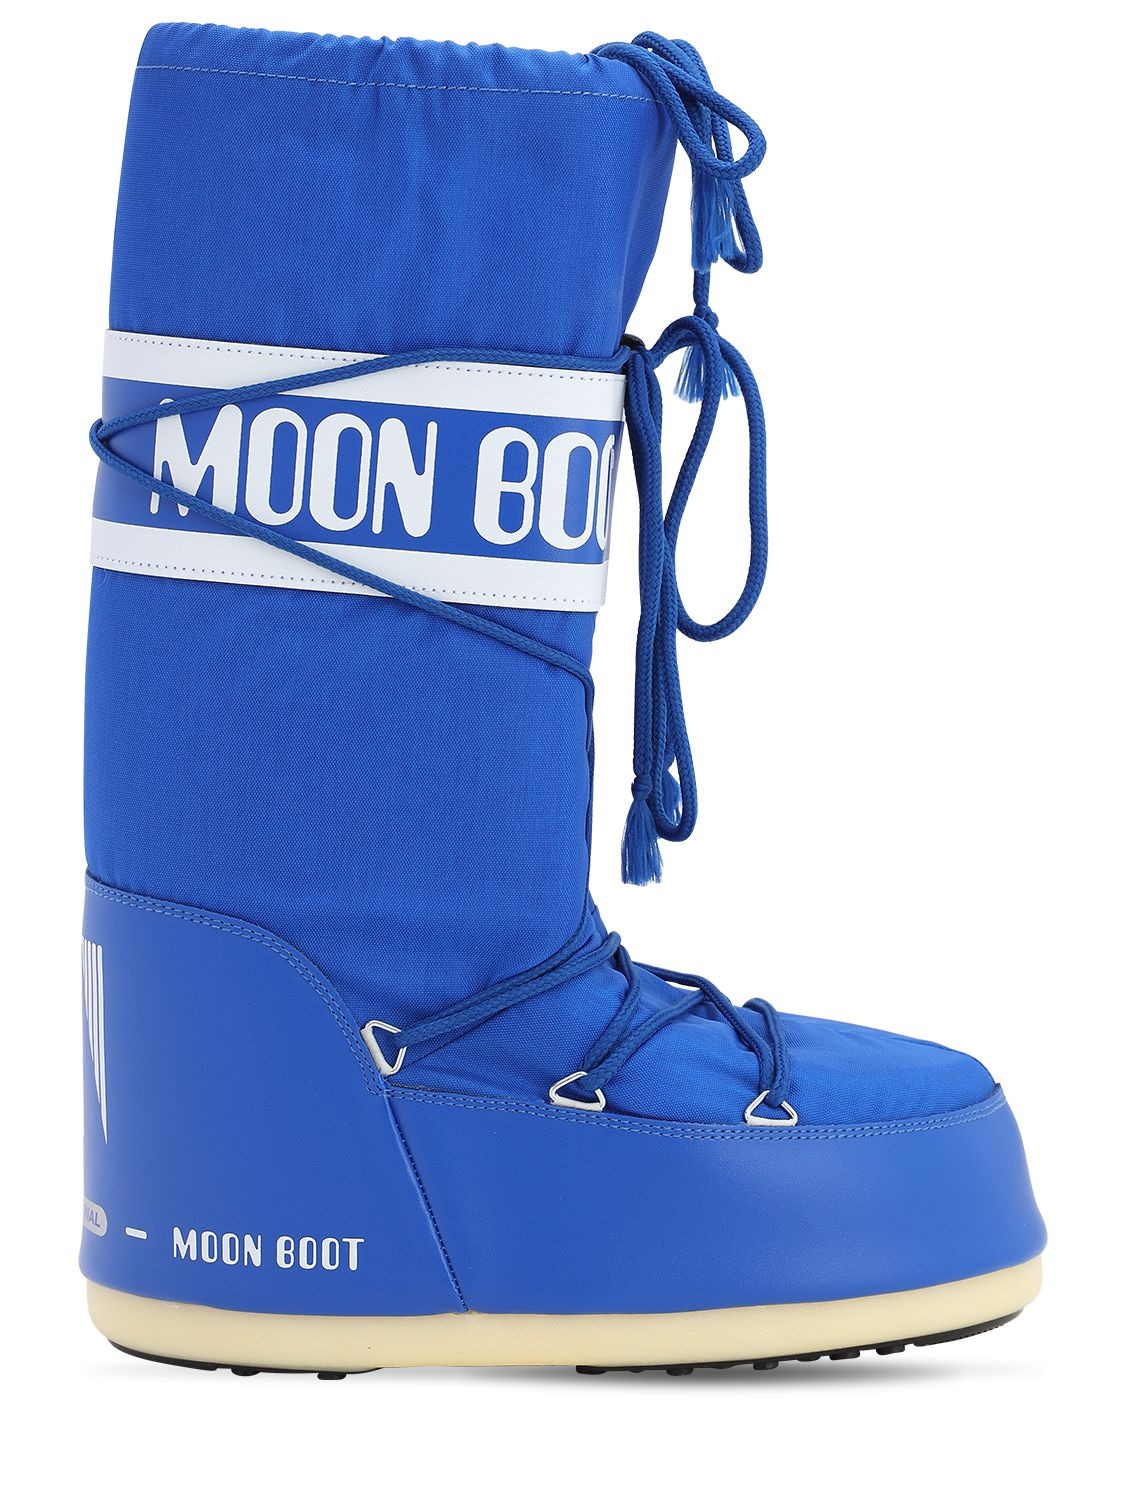 Moon Boot "classic"尼龙防水雪地靴 In Electric Blue